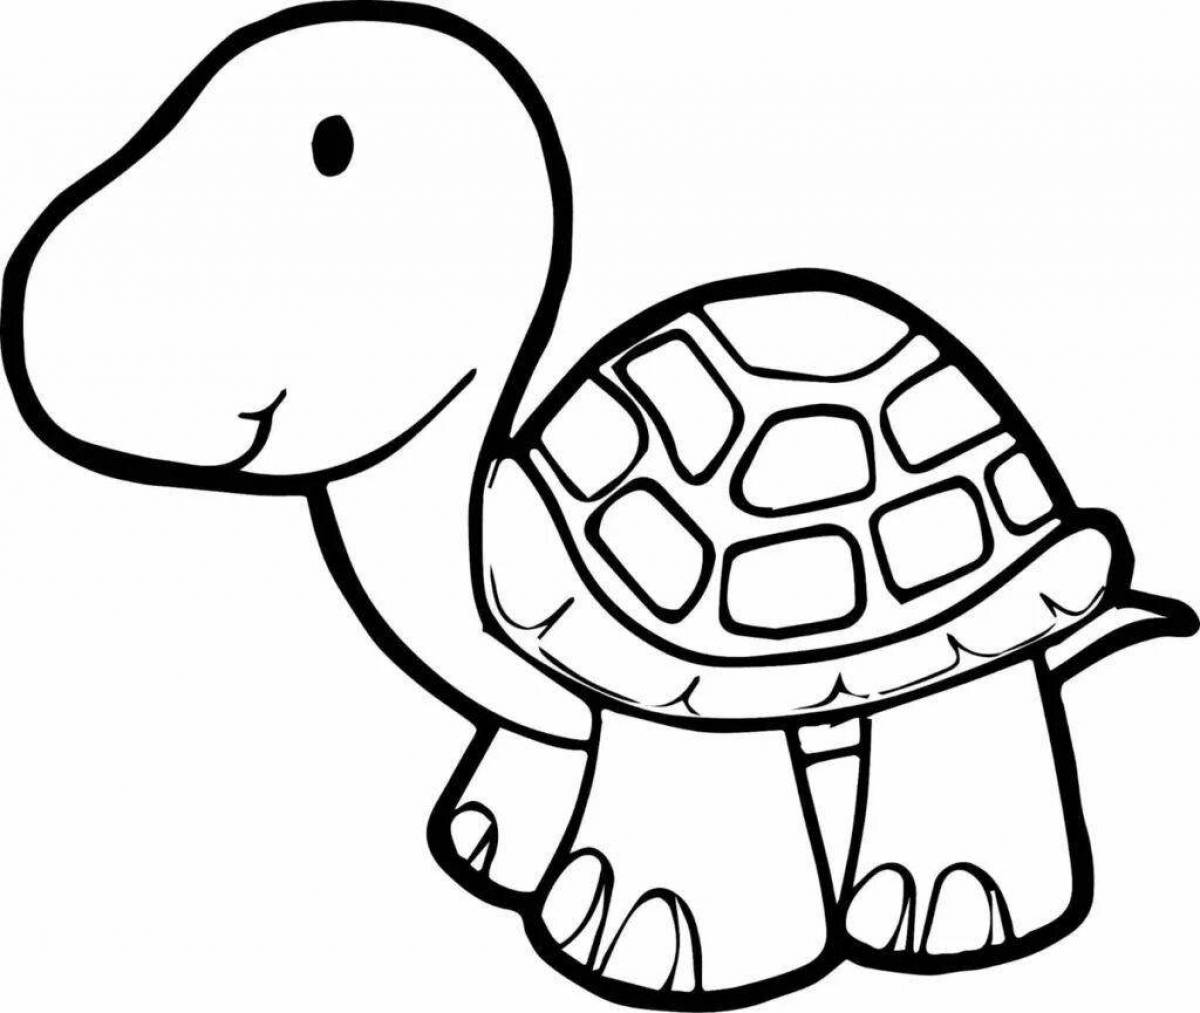 Funny turtle coloring pages